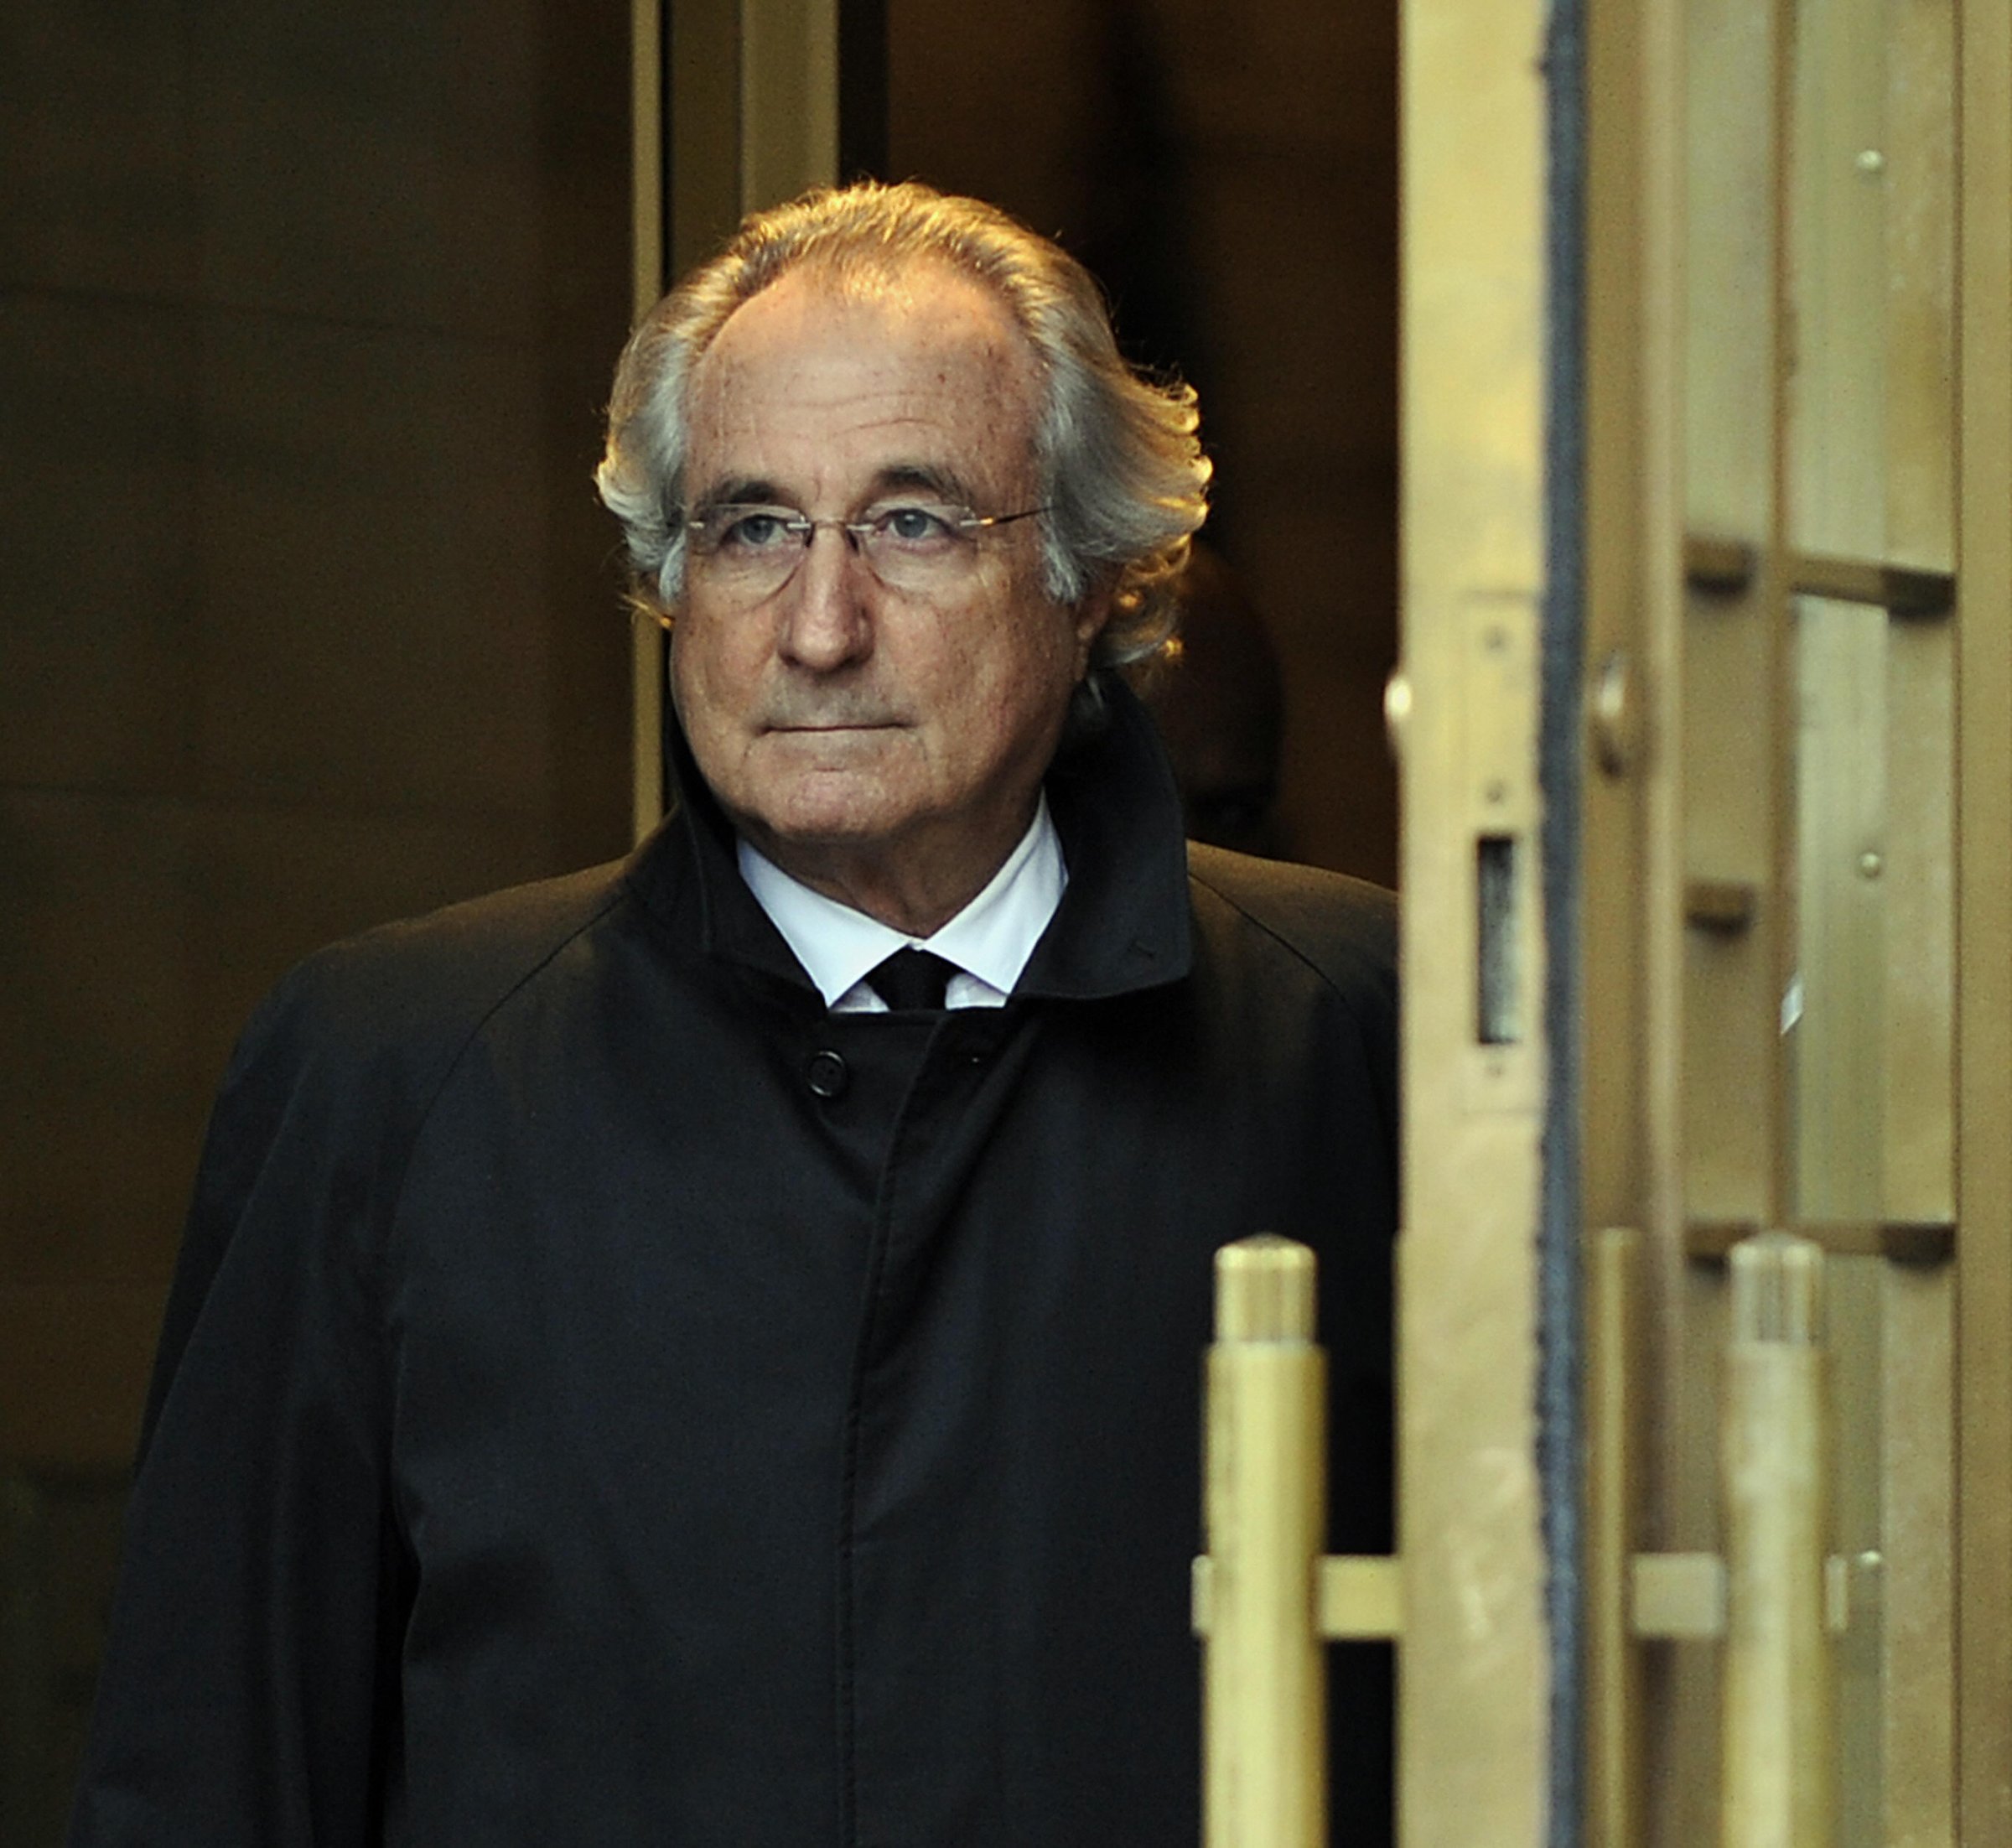 A picture taken on January 14, 2009 in New York, shows Bernard Madoff leaving US Federal Court after a hearing regarding his bail.